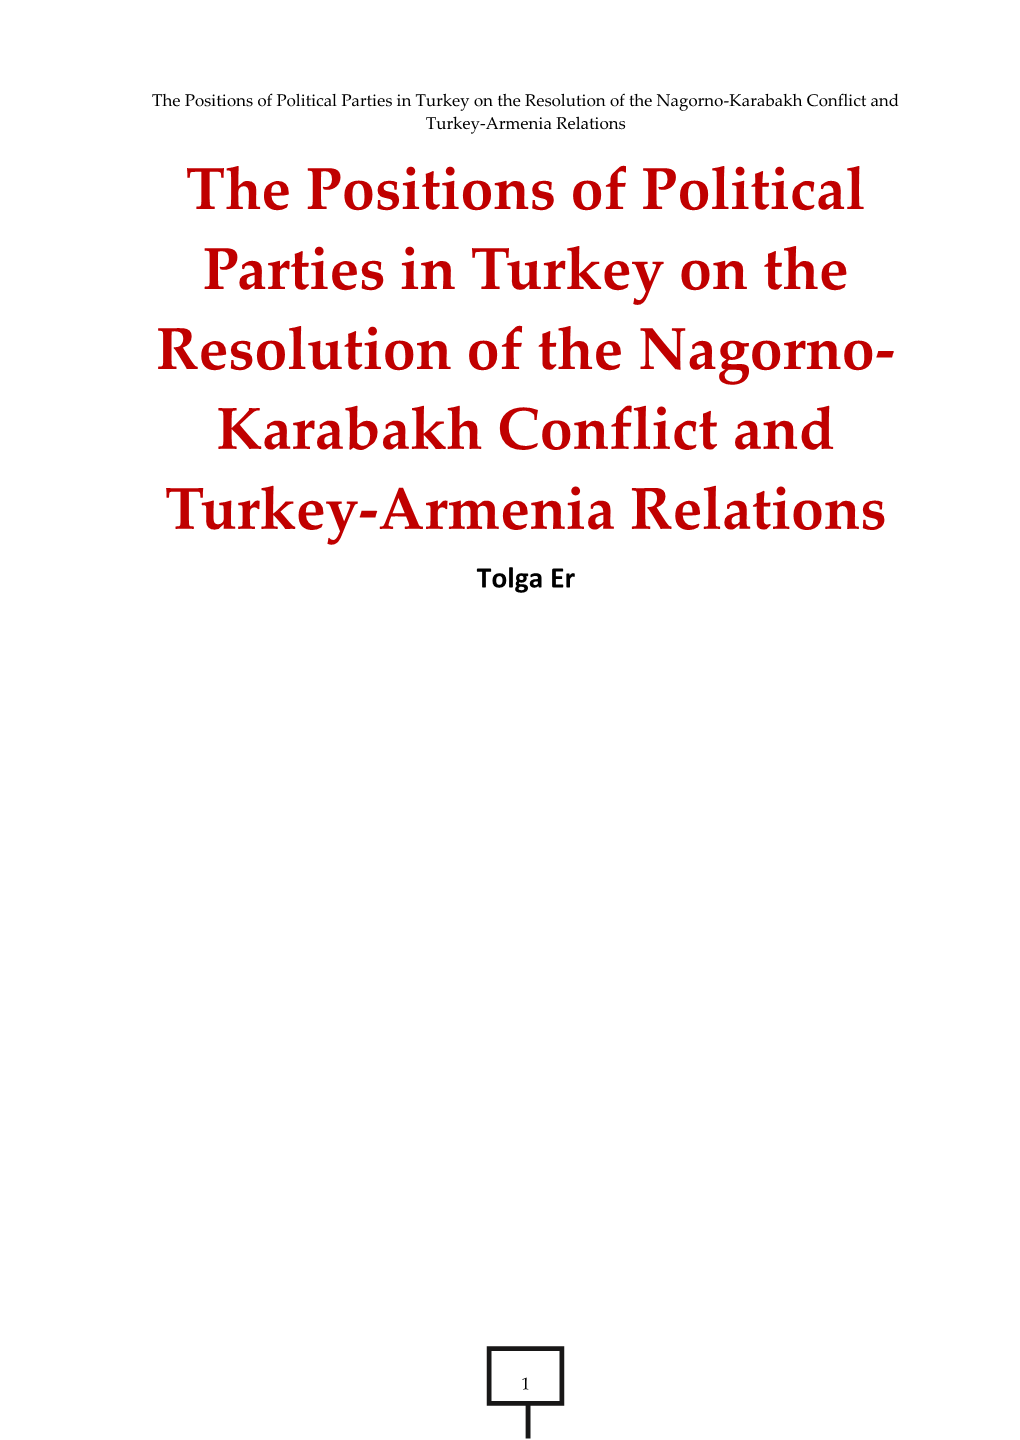 The Positions of Political Parties in Turkey on the Resolution of The